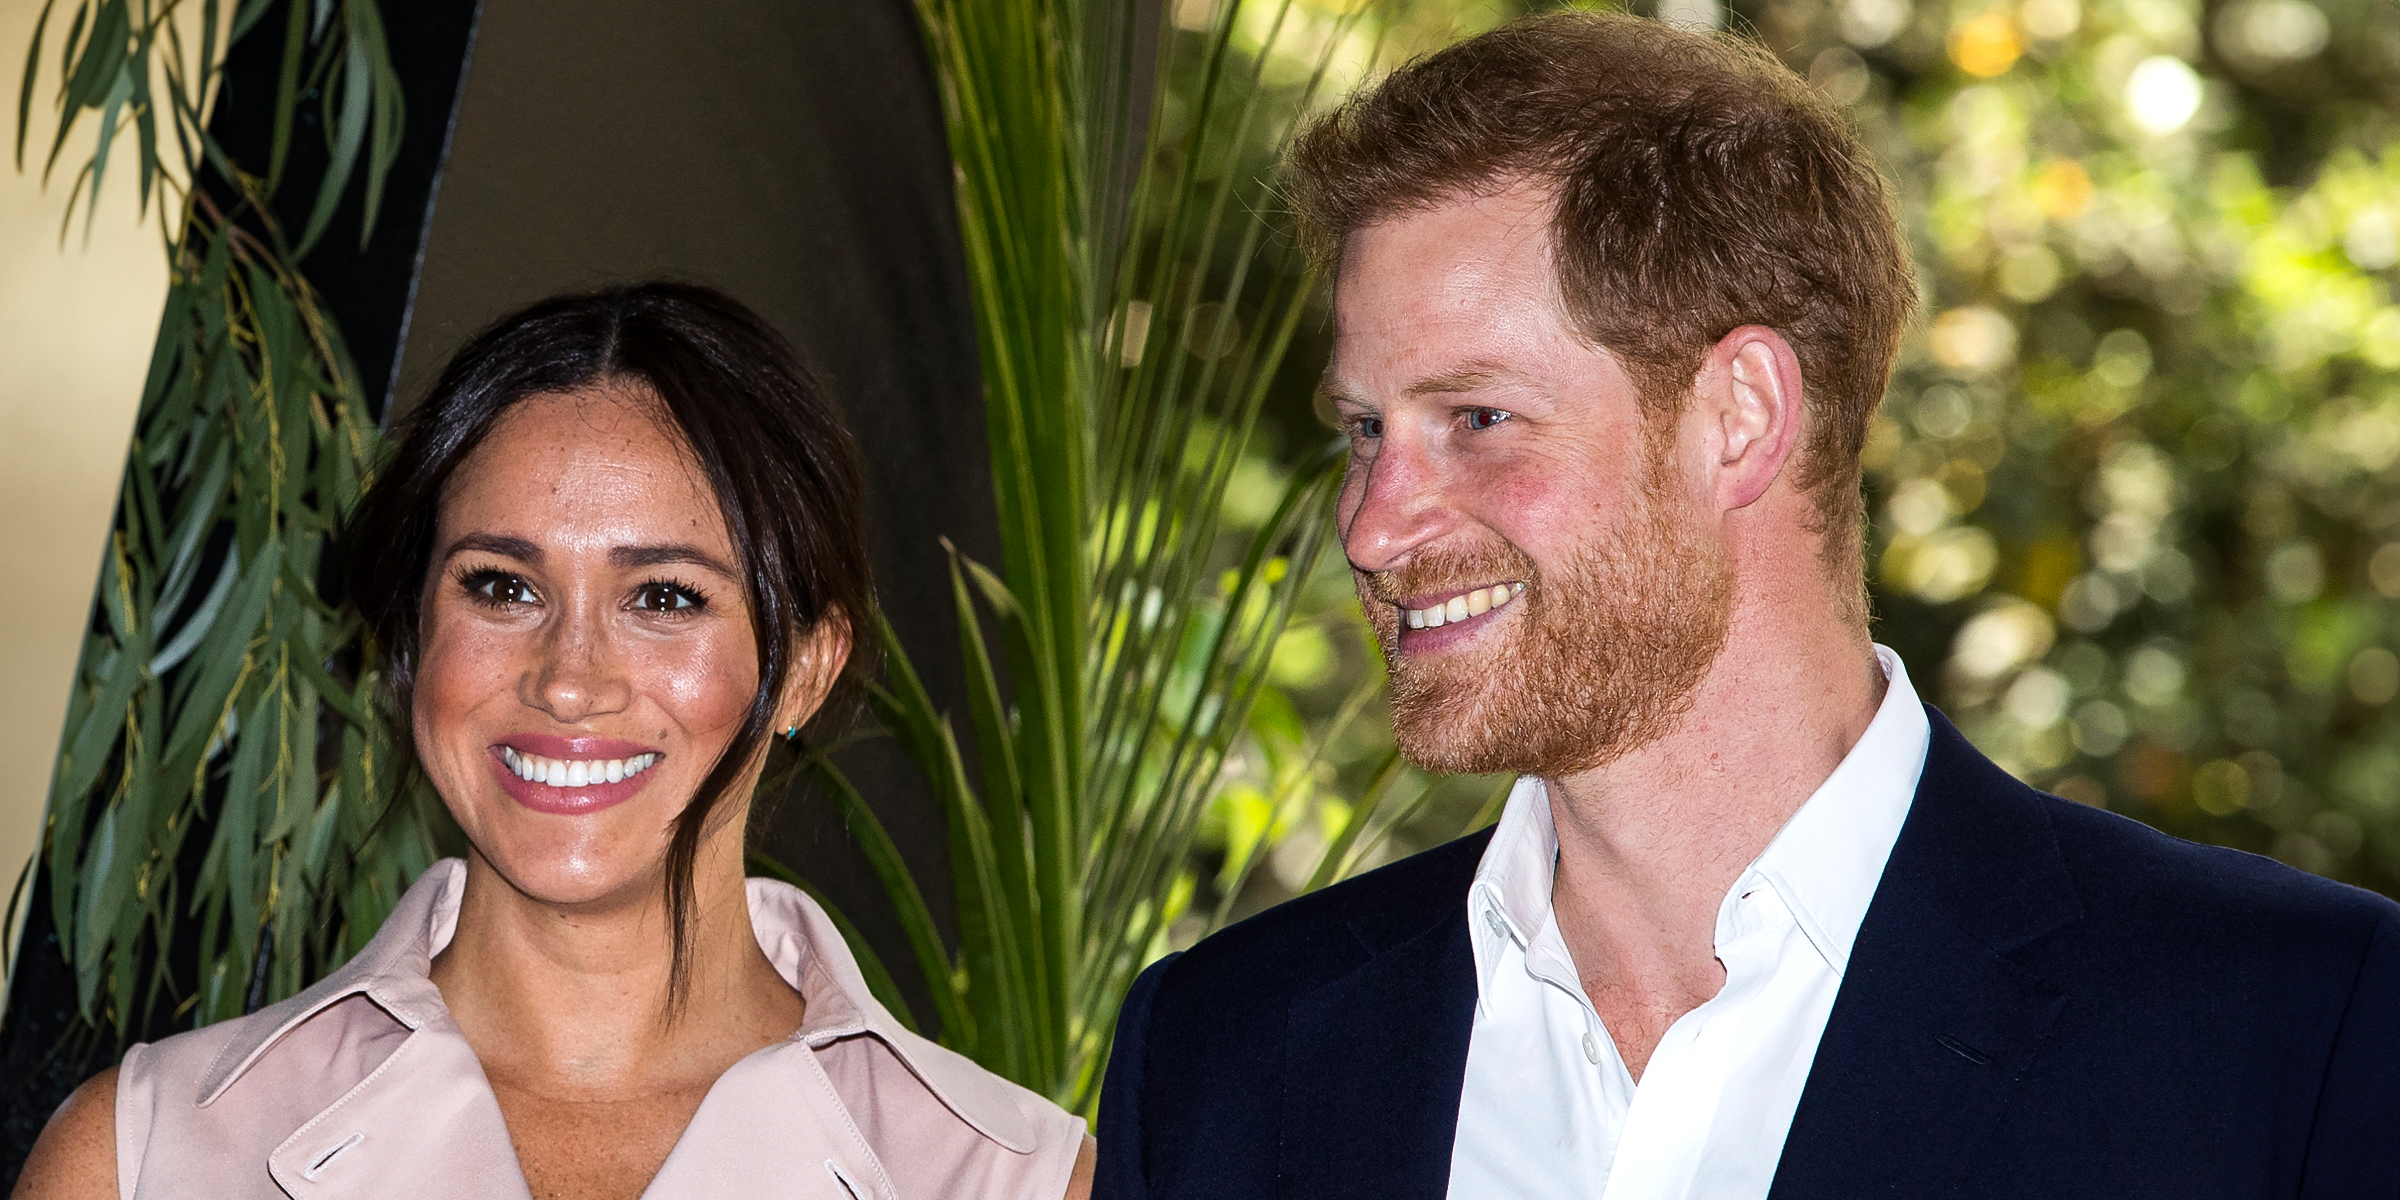 Prince Harry and Meghan, Duchess of Sussex | Source: Getty Images